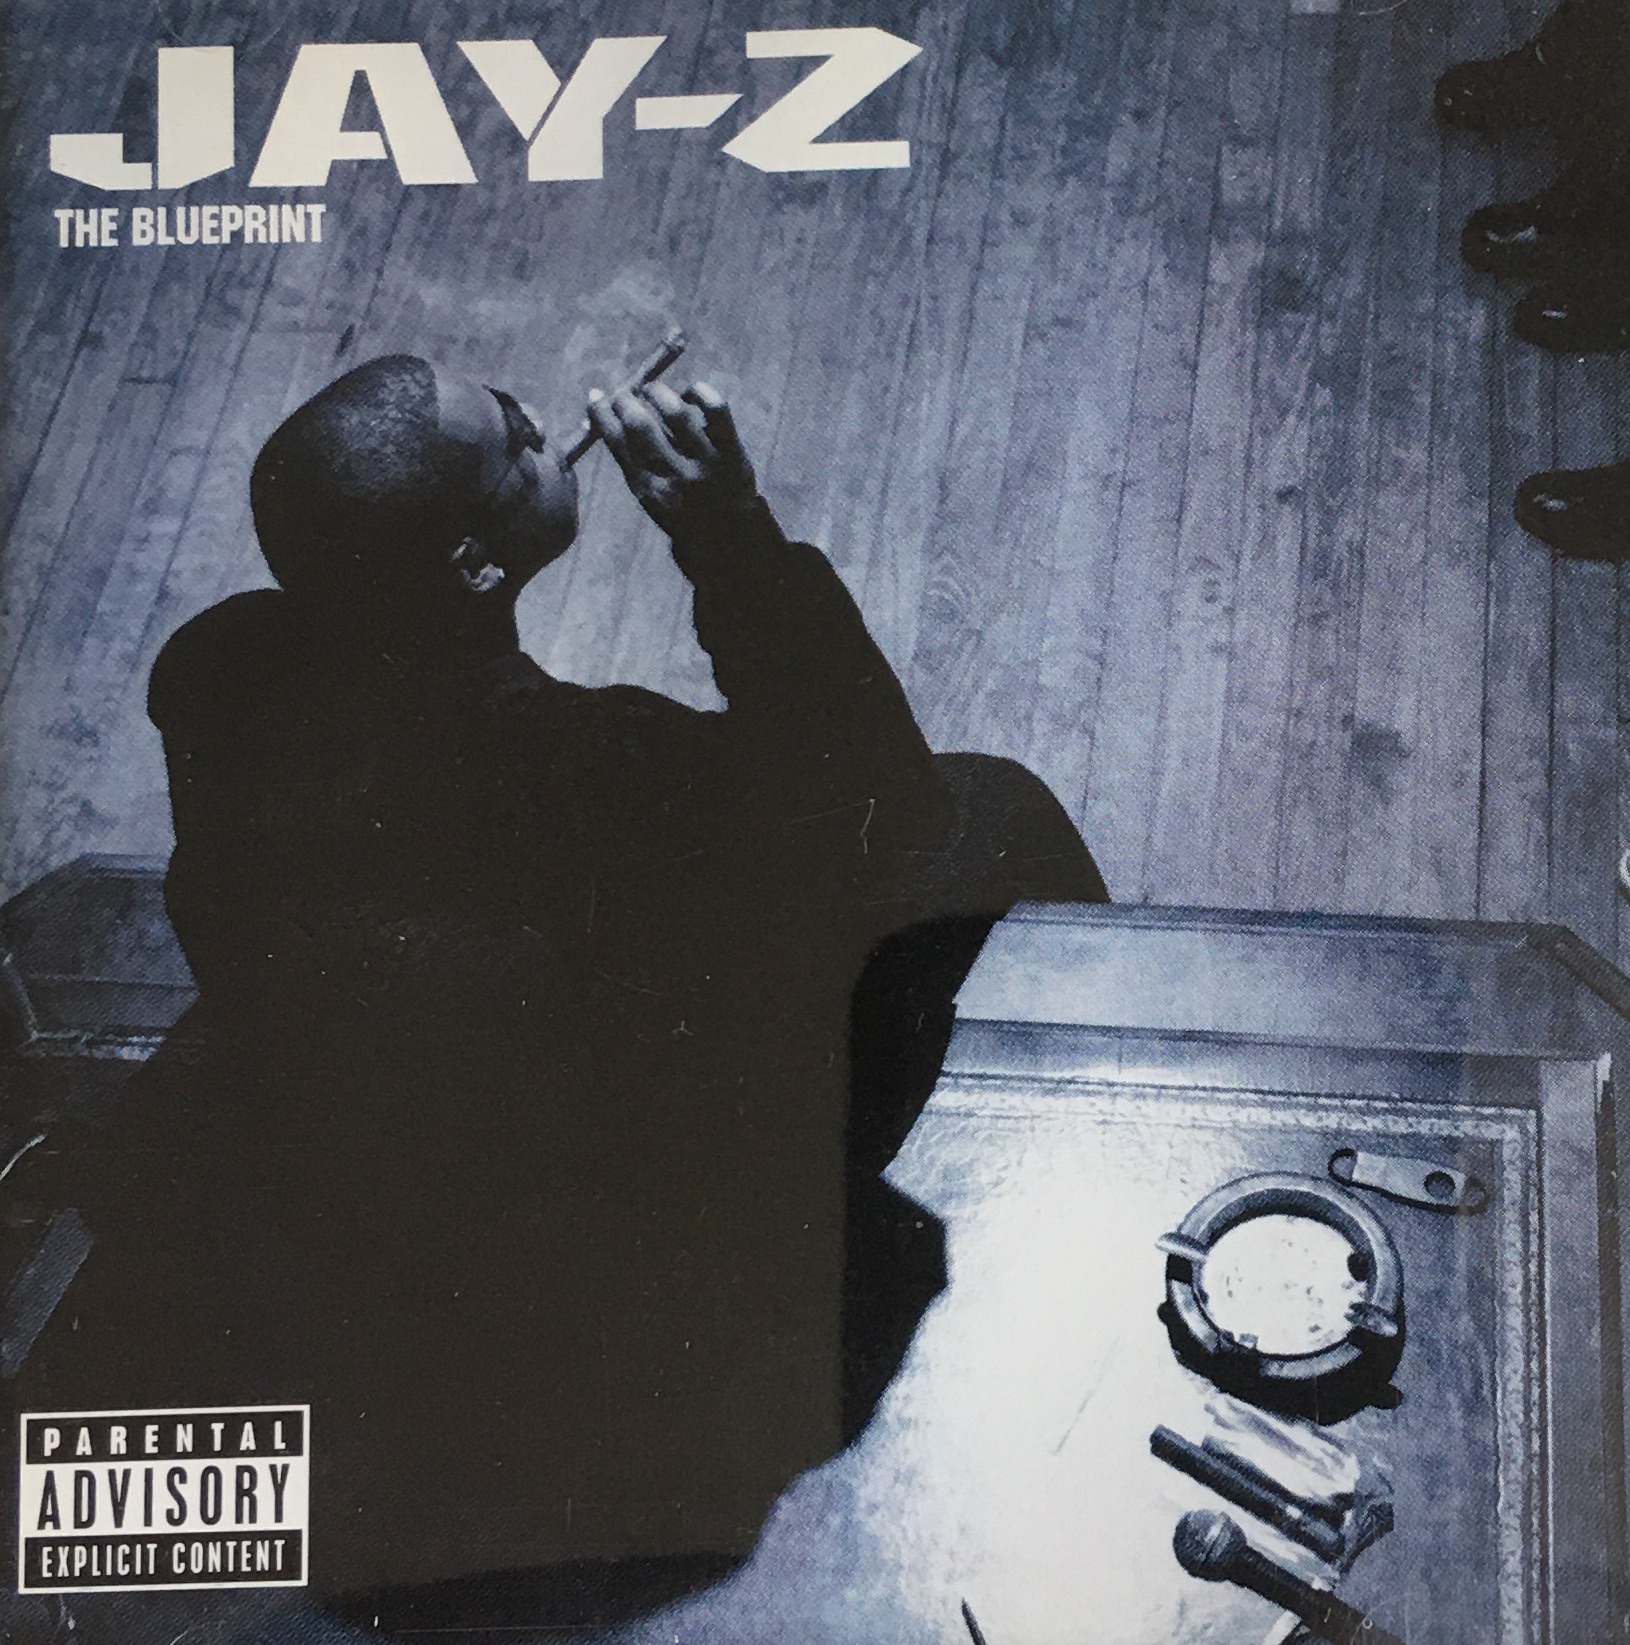 jay z blueprint 2 come and get me